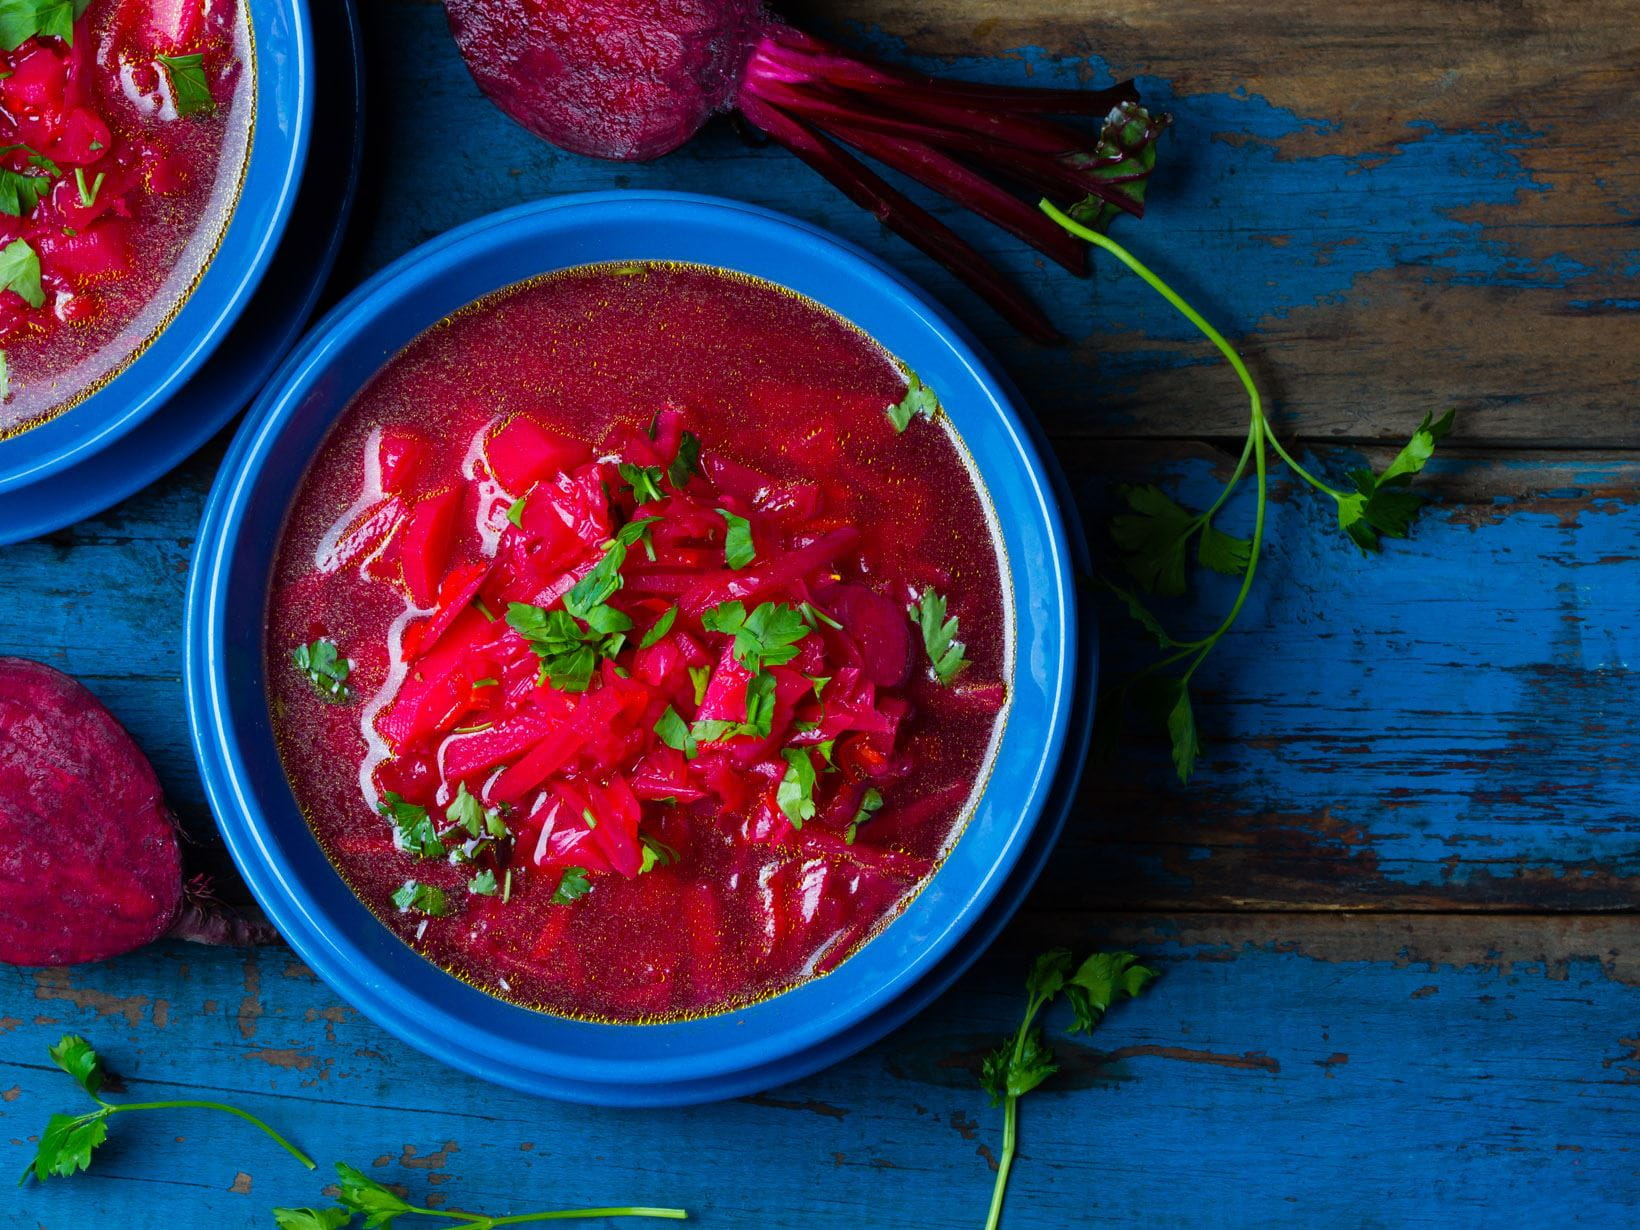 2. Abendessenidee: Rote-Bete-Suppe